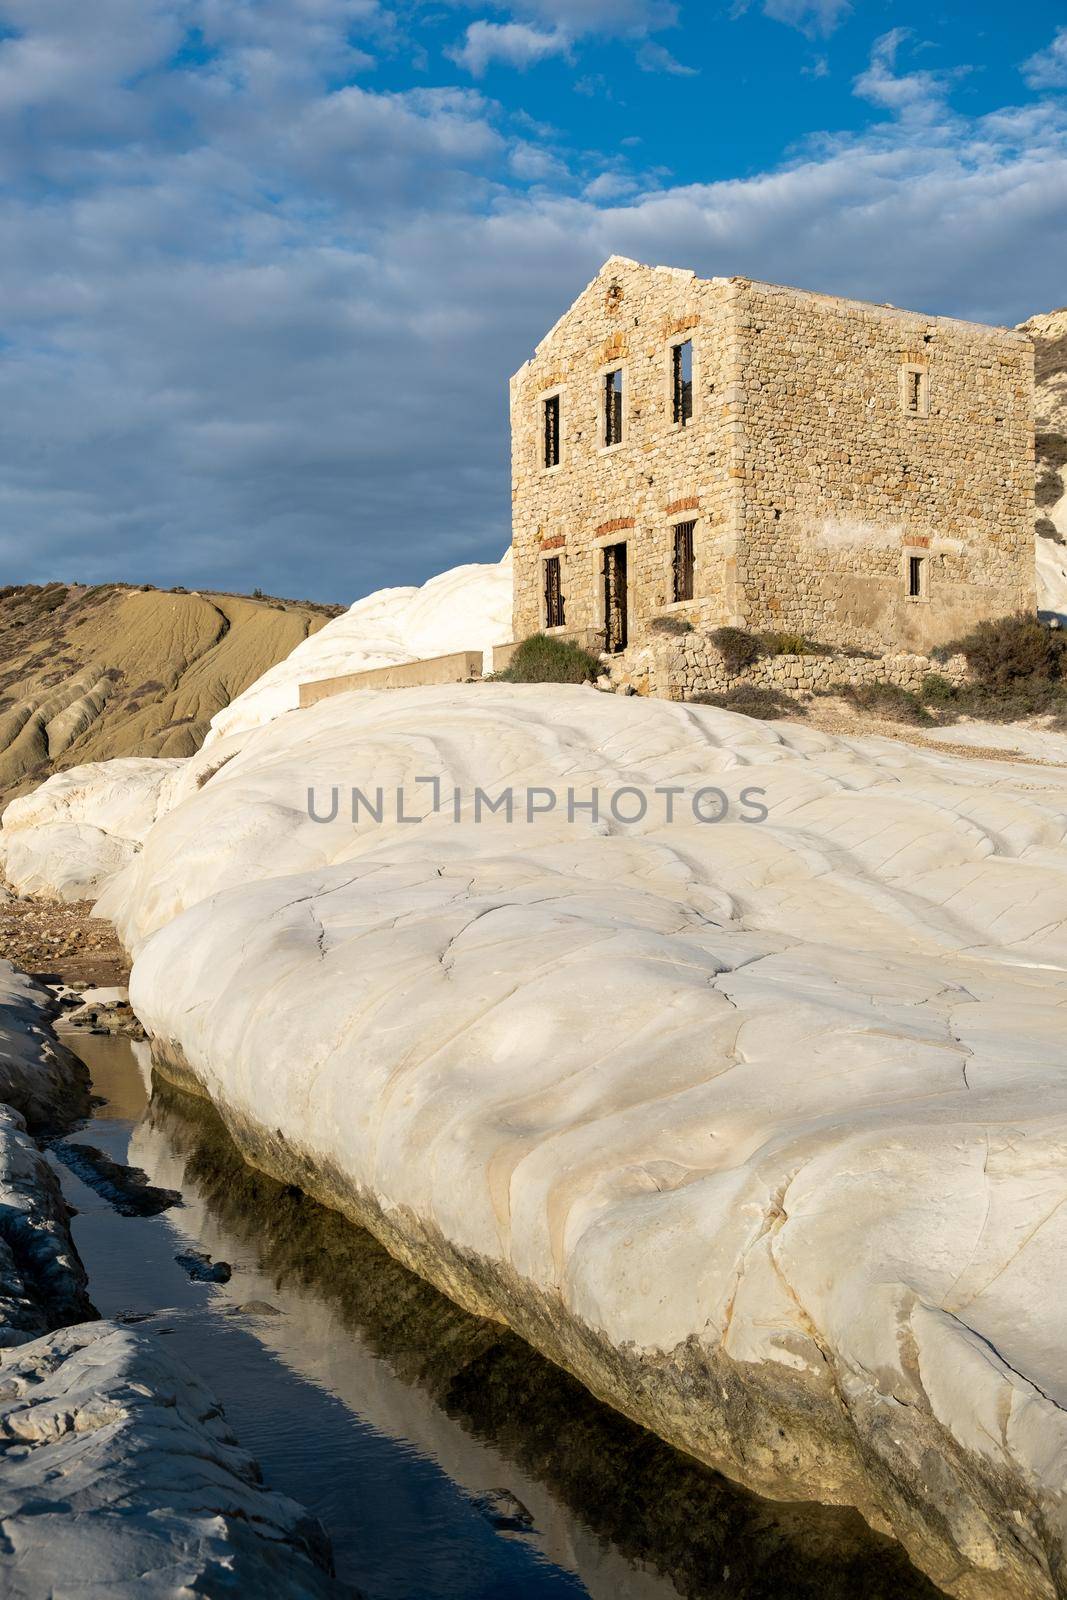 Punta Bianca, Agrigento in Sicily Italy White beach with old ruins of an abandoned stone house on white cliffs. Sicilia Italy